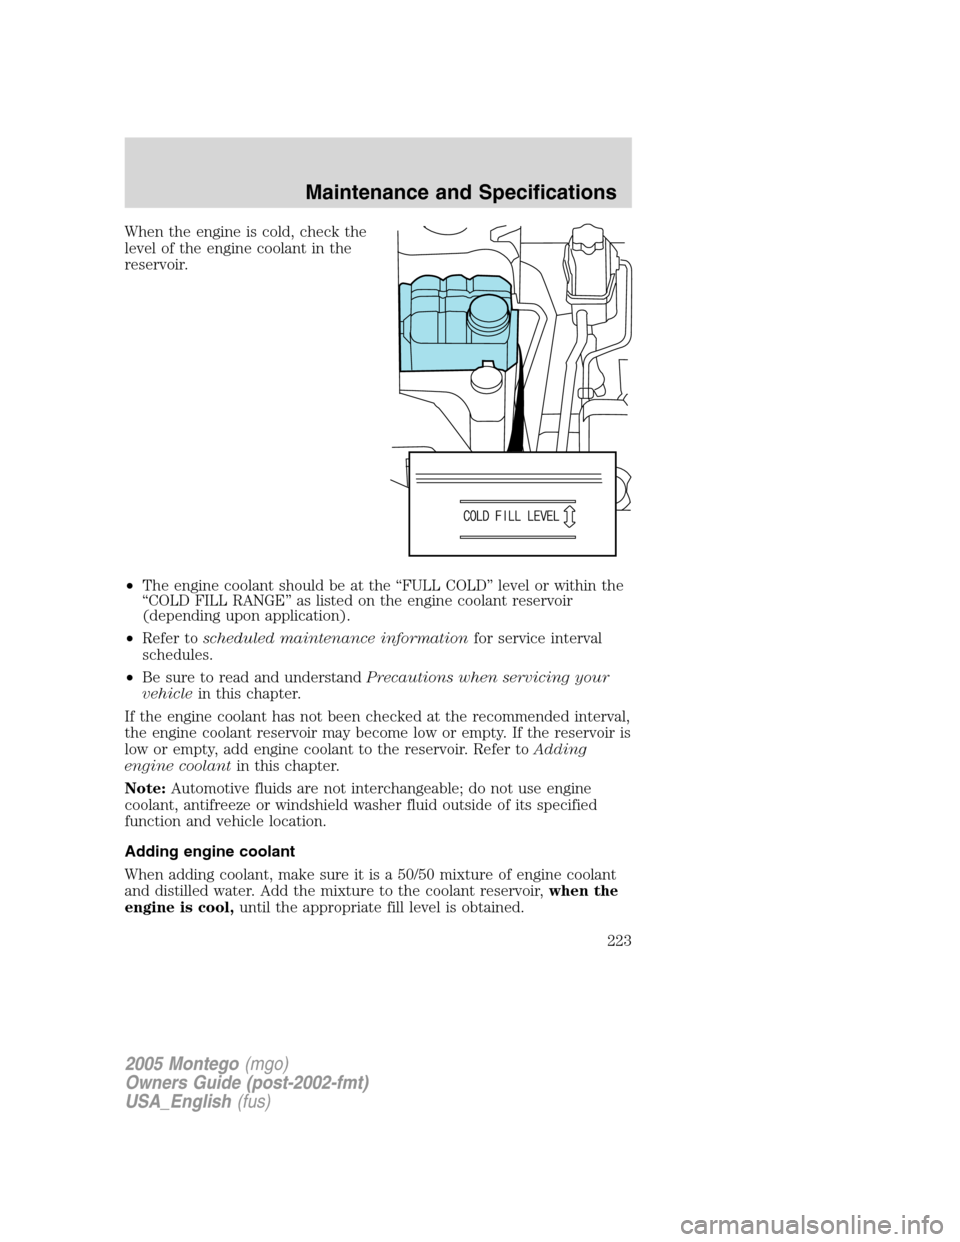 Mercury Montego 2005  s User Guide When the engine is cold, check the
level of the engine coolant in the
reservoir.
•The engine coolant should be at the “FULL COLD” level or within the
“COLD FILL RANGE” as listed on the engin